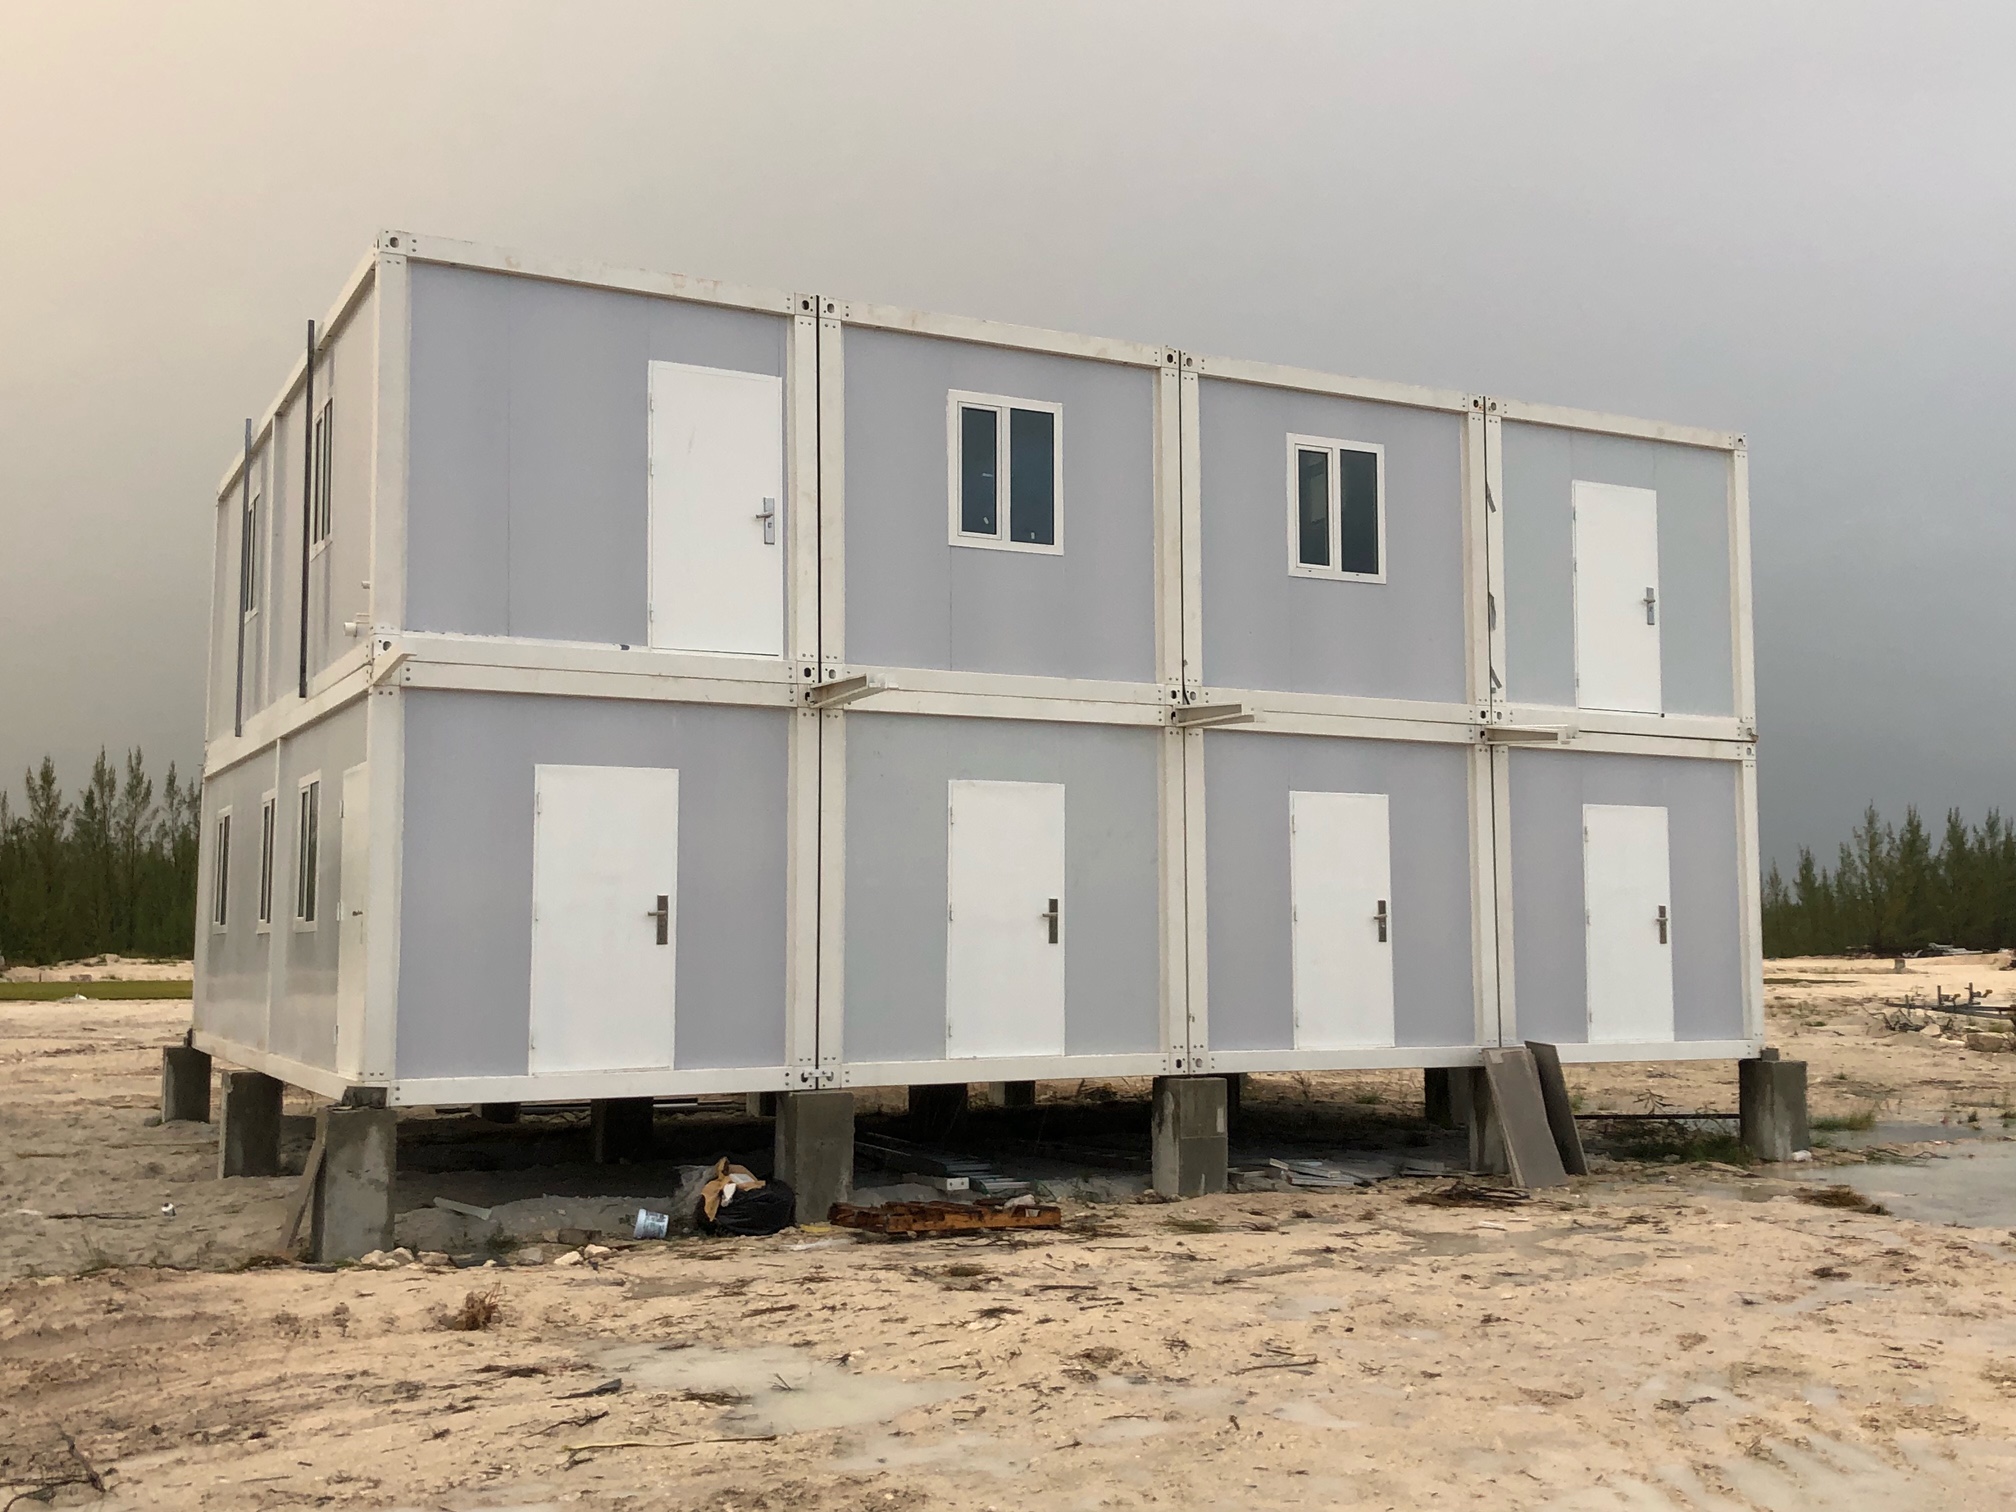 Outdoor prefabricated integrated modular manufactured portable casas container contener house homes for sale